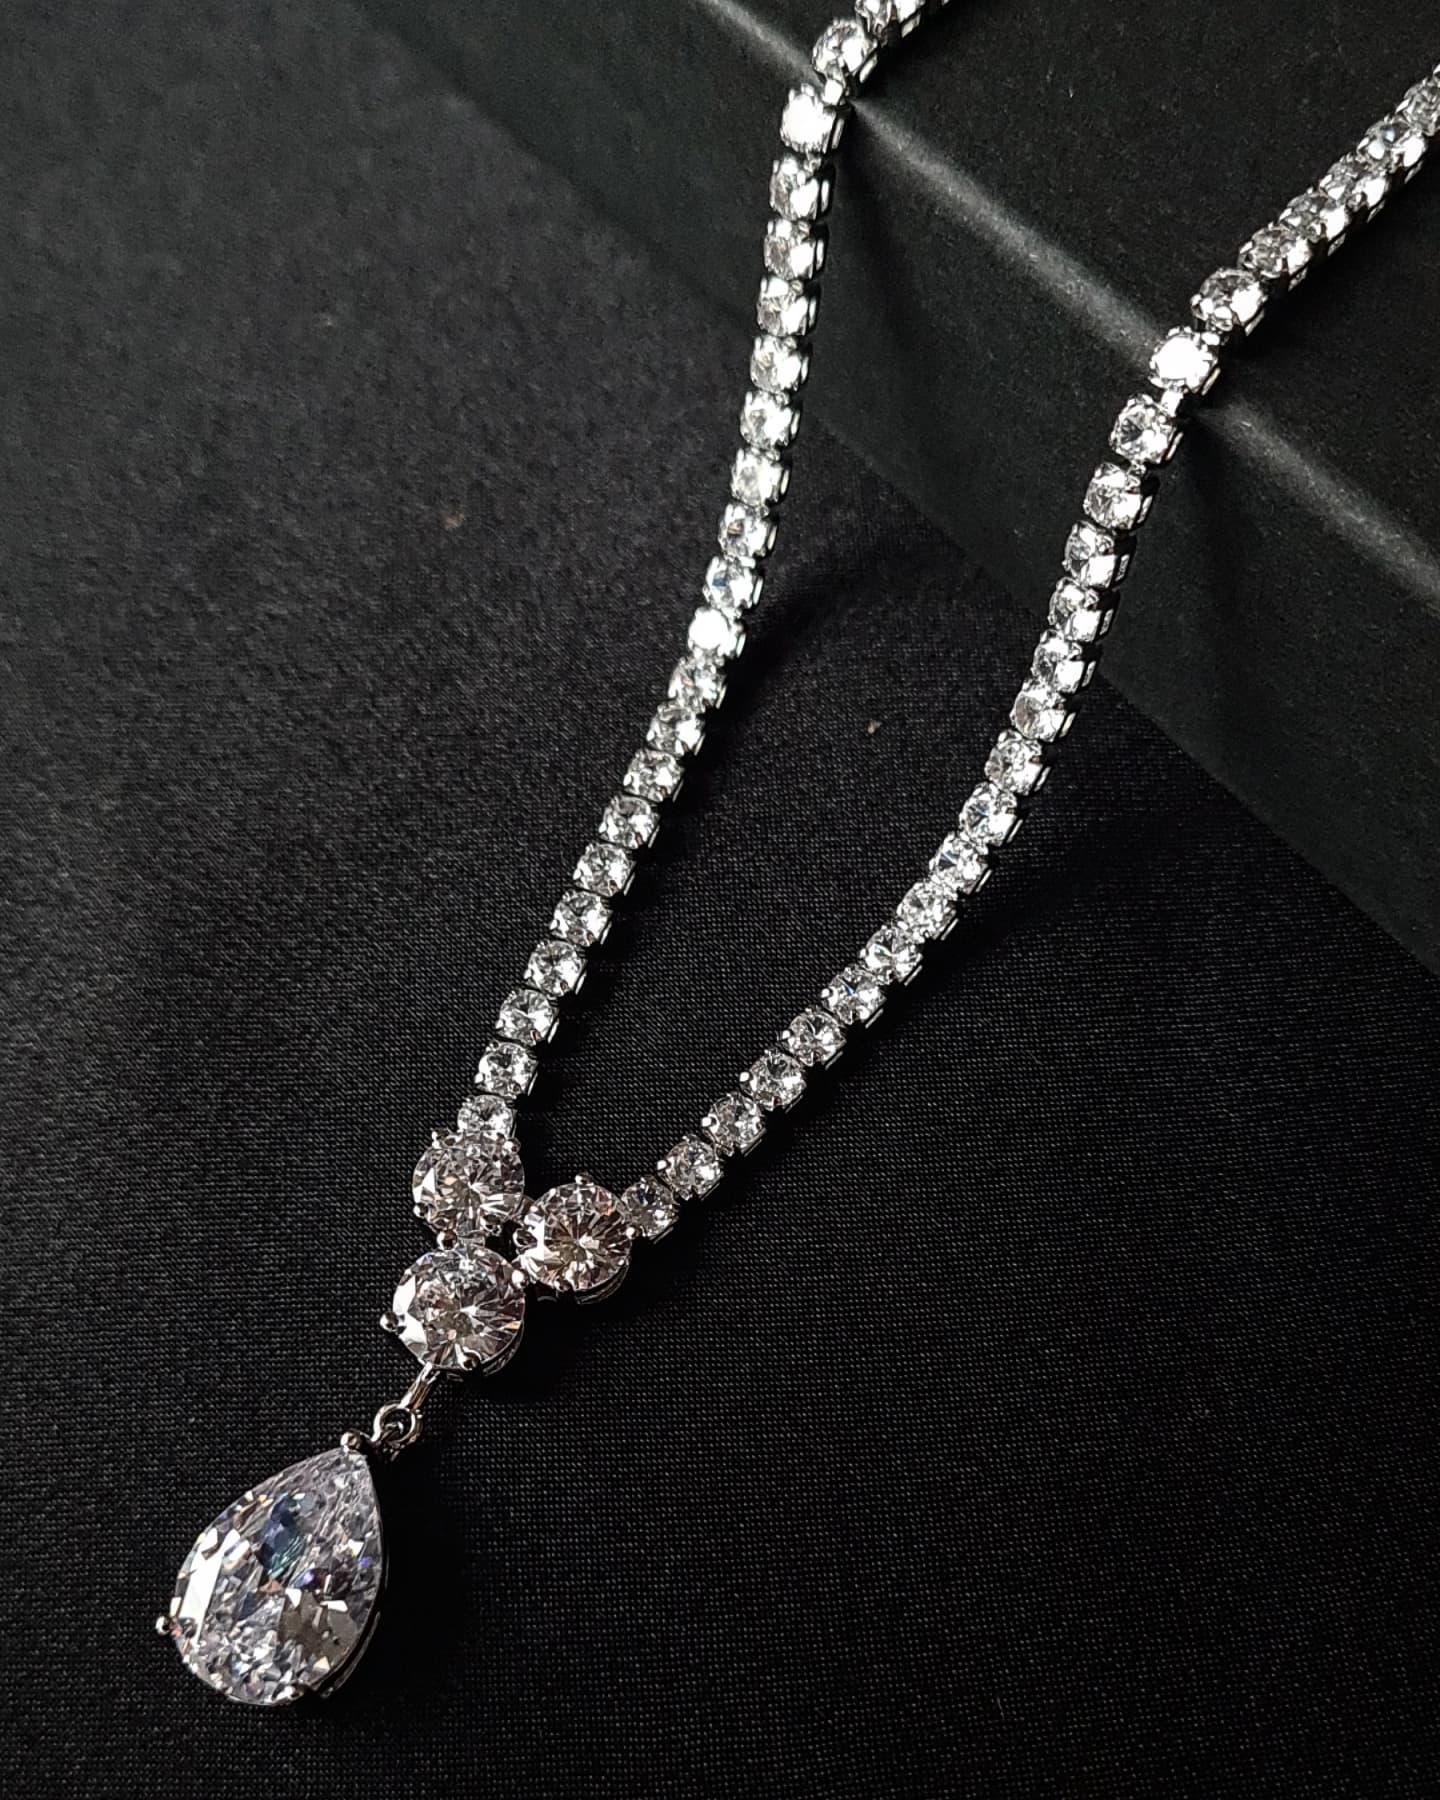 Close-up view of a diamond necklace sparkling with zirconia Diamonds displayed on a black table. the center piece is tear drop shape zirconia stone. 